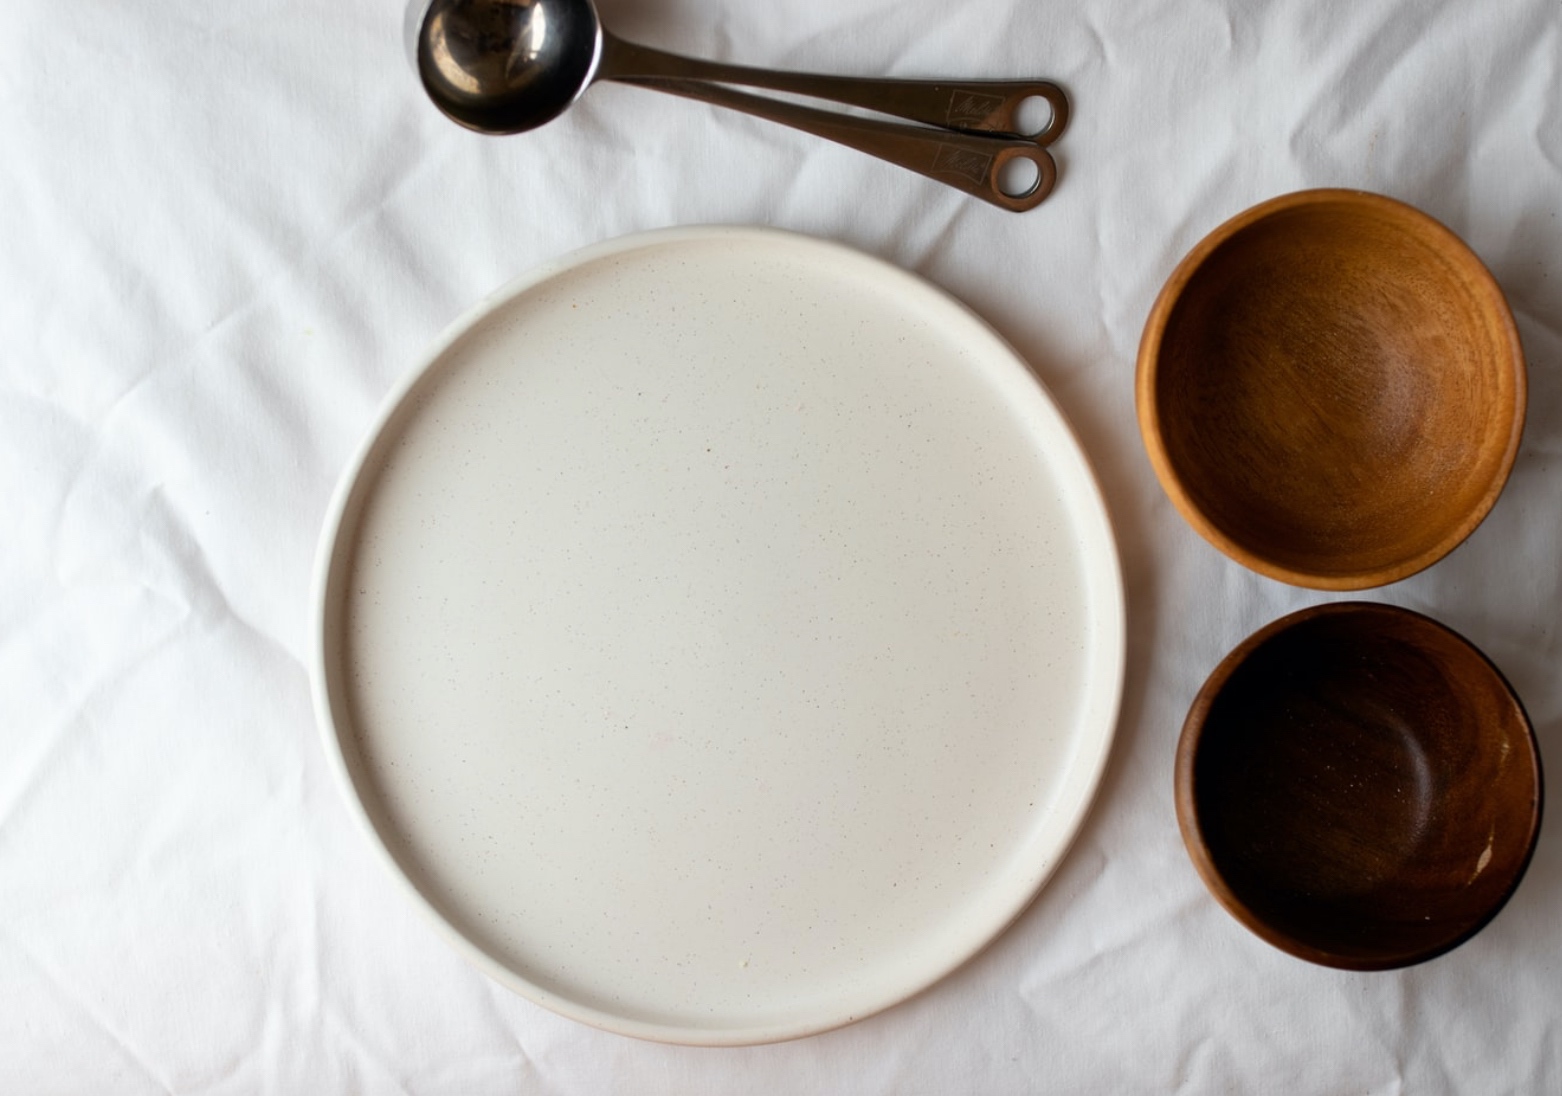 A top down view of an empty plate and bowls. This could represent the appetite changes that eating disorder treatment in Hershey, PA can offer support with. Learn more about online therapy for eating disorders in Allentown, PA by contacting a disordered eating therapist in Hershey, PA today! 17033